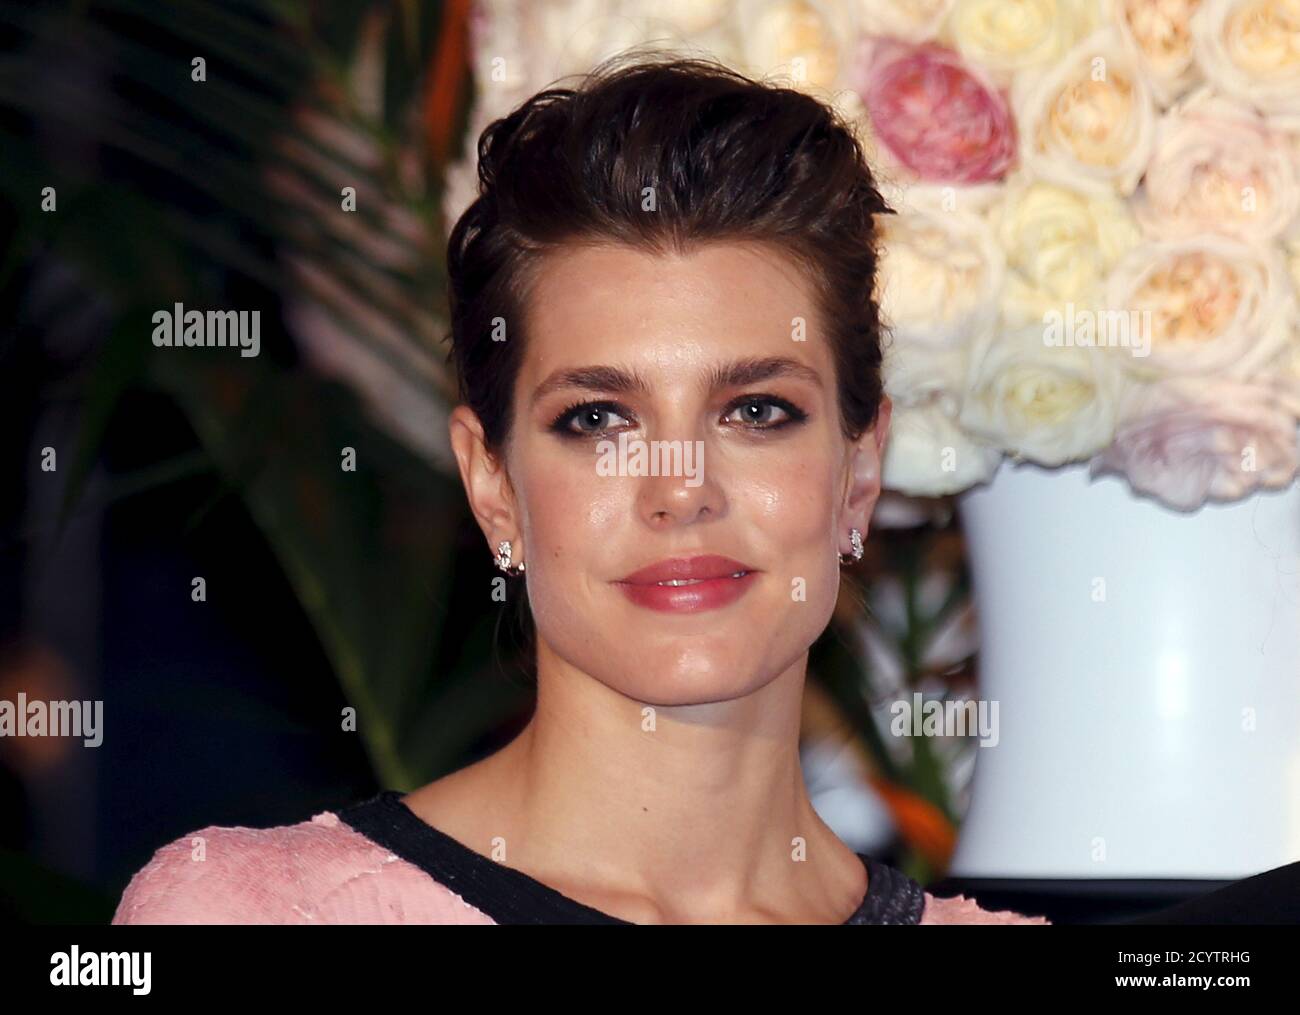 Charlotte Casiraghi, Princess Caroline of Hanover's daughter, arrives at  the Bal de la Rose in Monte Carlo March 28, 2015. The Bal de la Rose is a  traditional annual charity event in